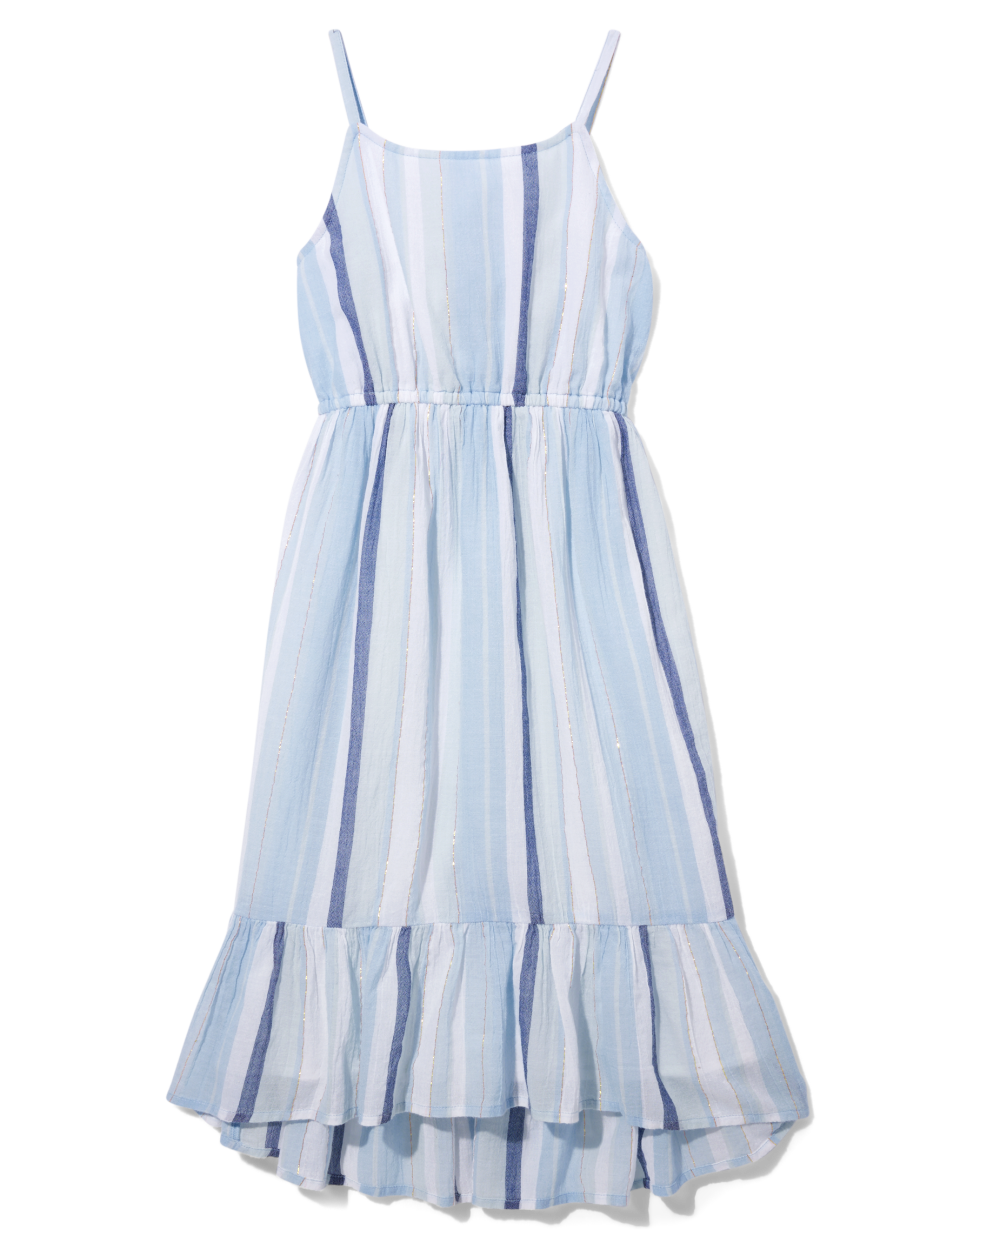 Girls Round Neck Smocked Sleeveless Spaghetti Strap Tiered Above the Knee Striped Print Dress With Ruffles